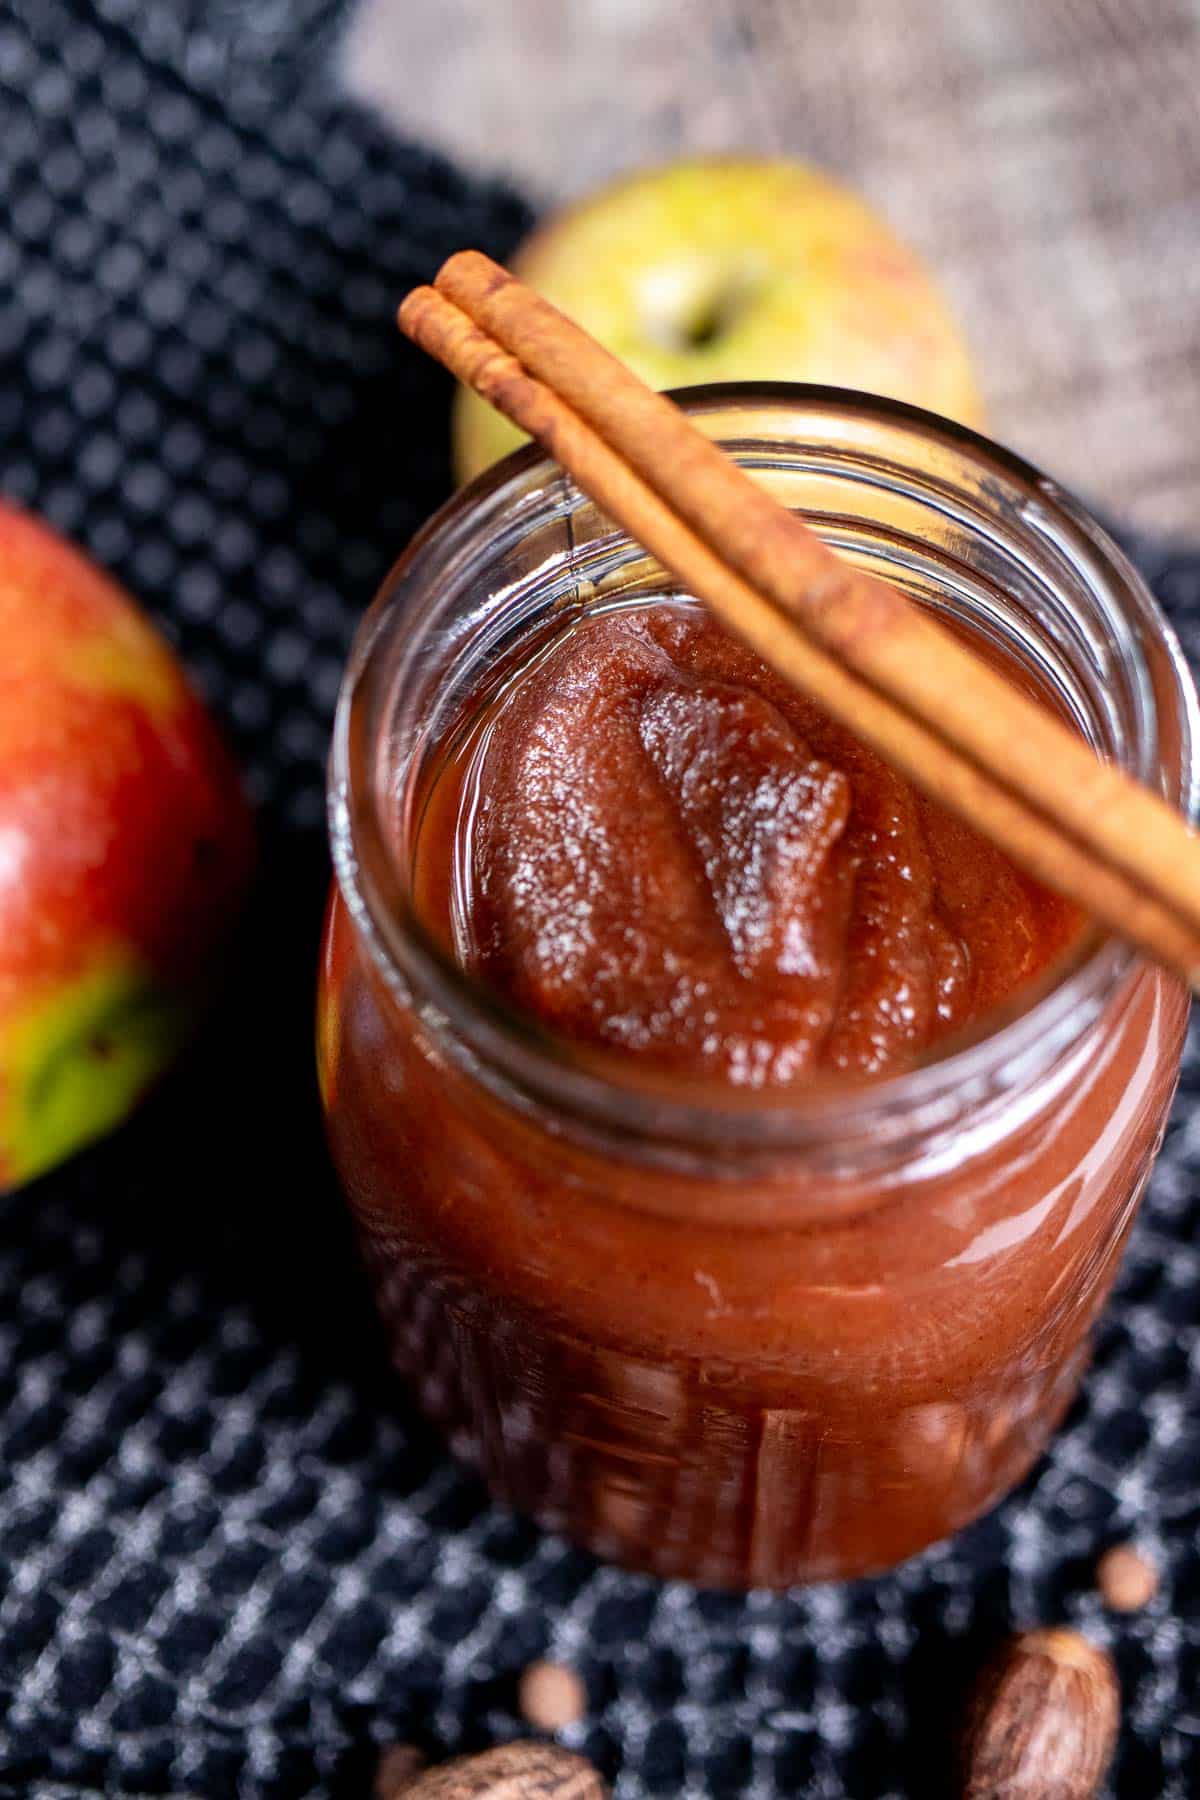 Overhead view of a pint jar full of apple butter with a cinnamon stick across the top.